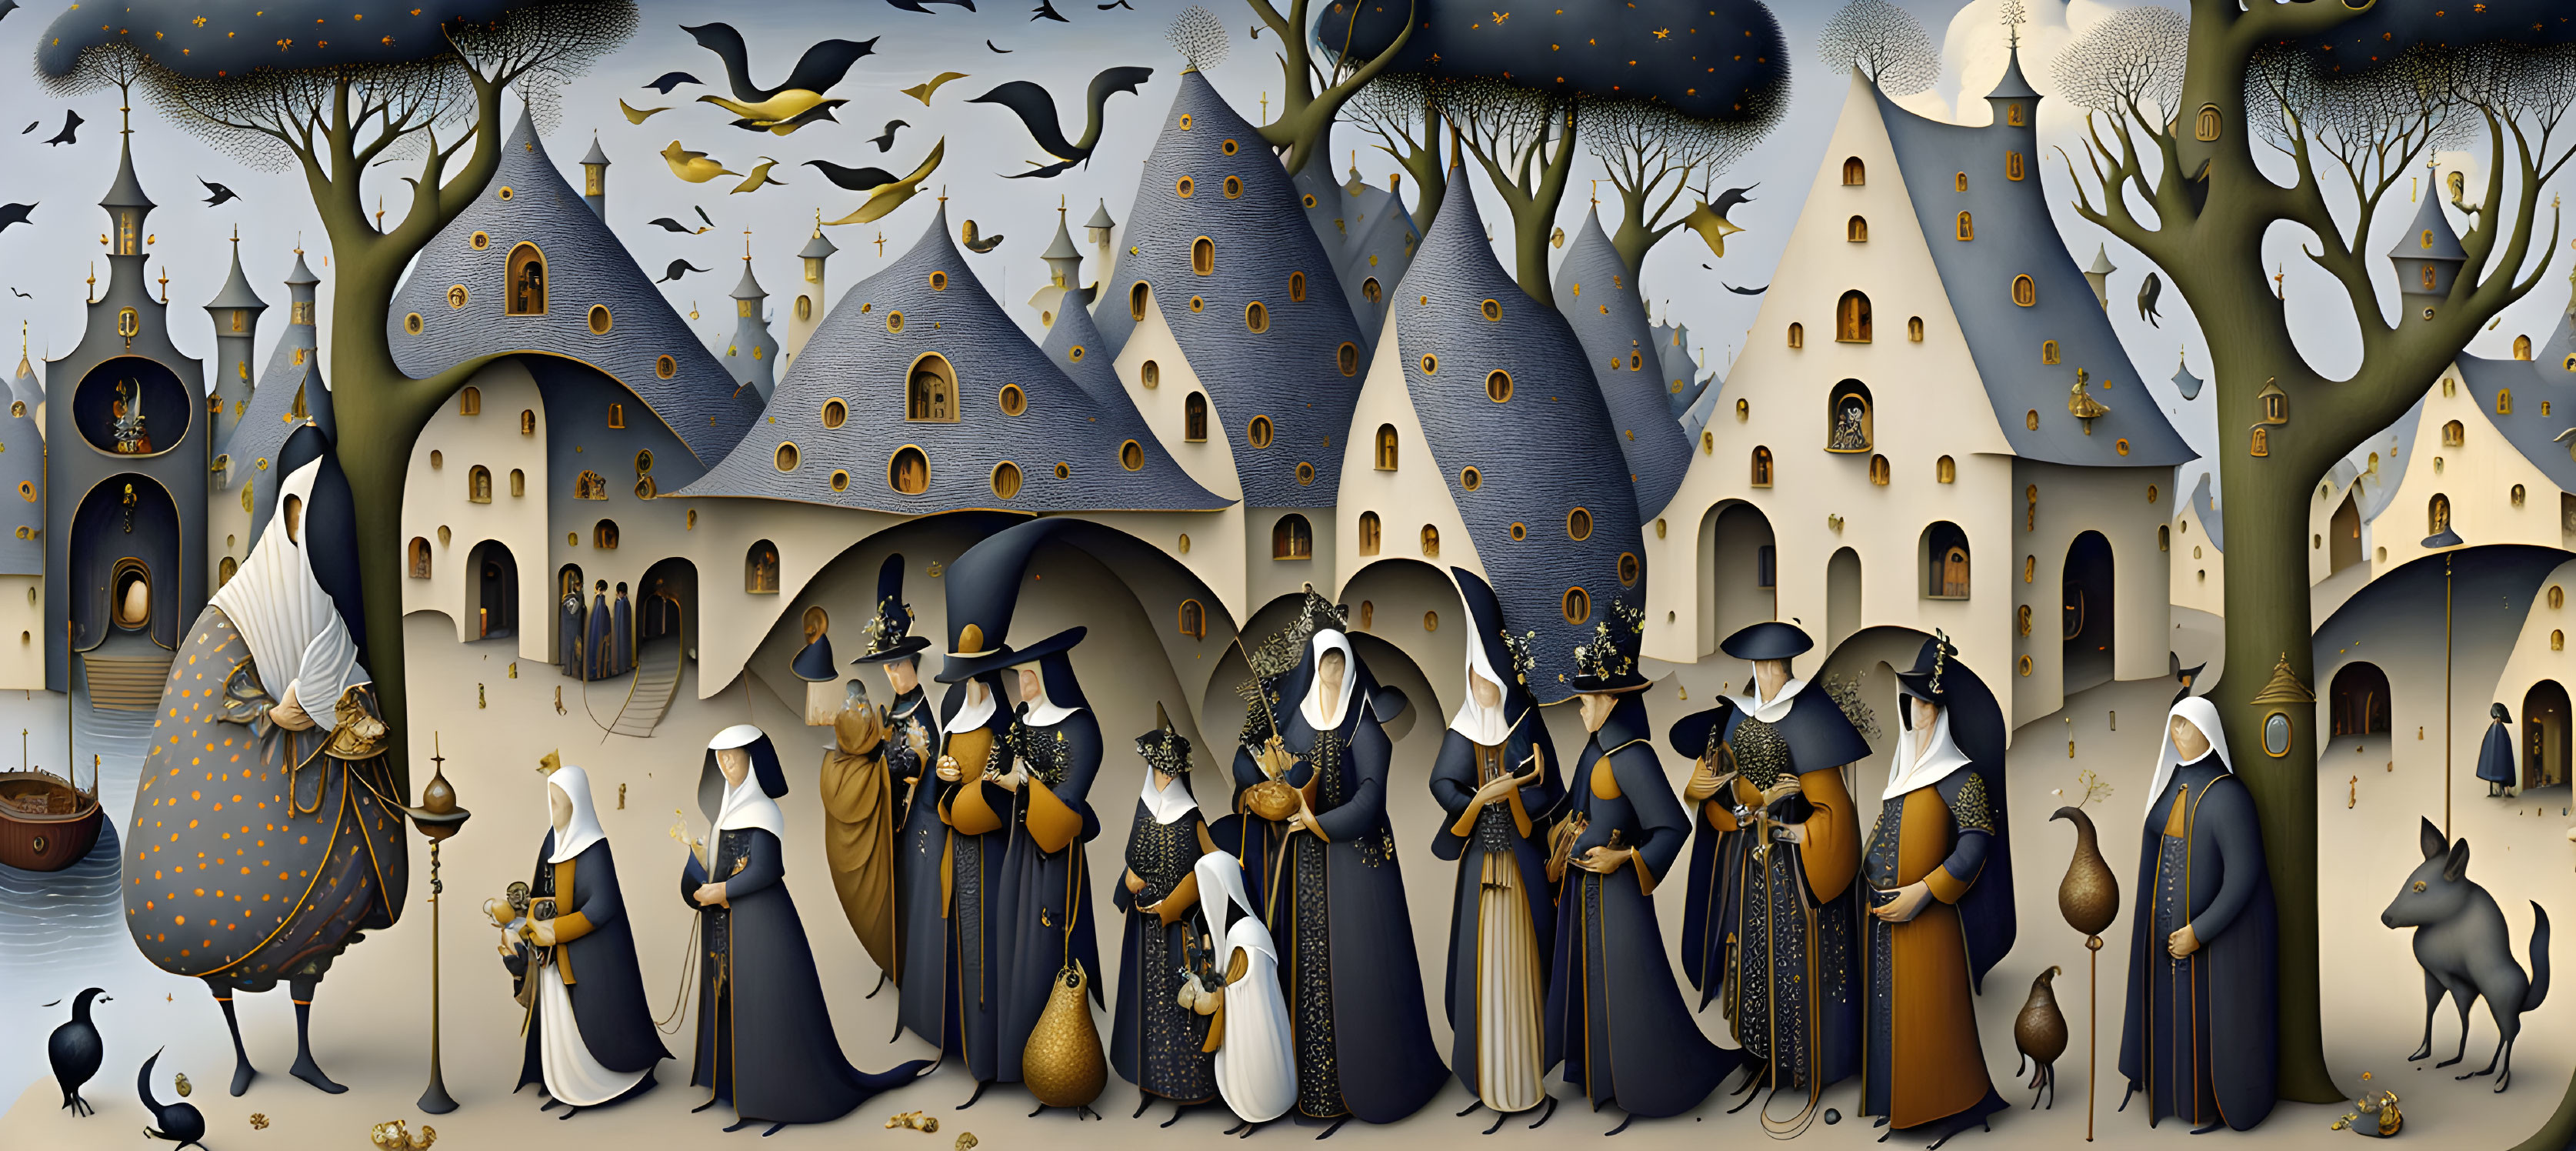 Surreal robed figures with bird-like faces in whimsical village landscape